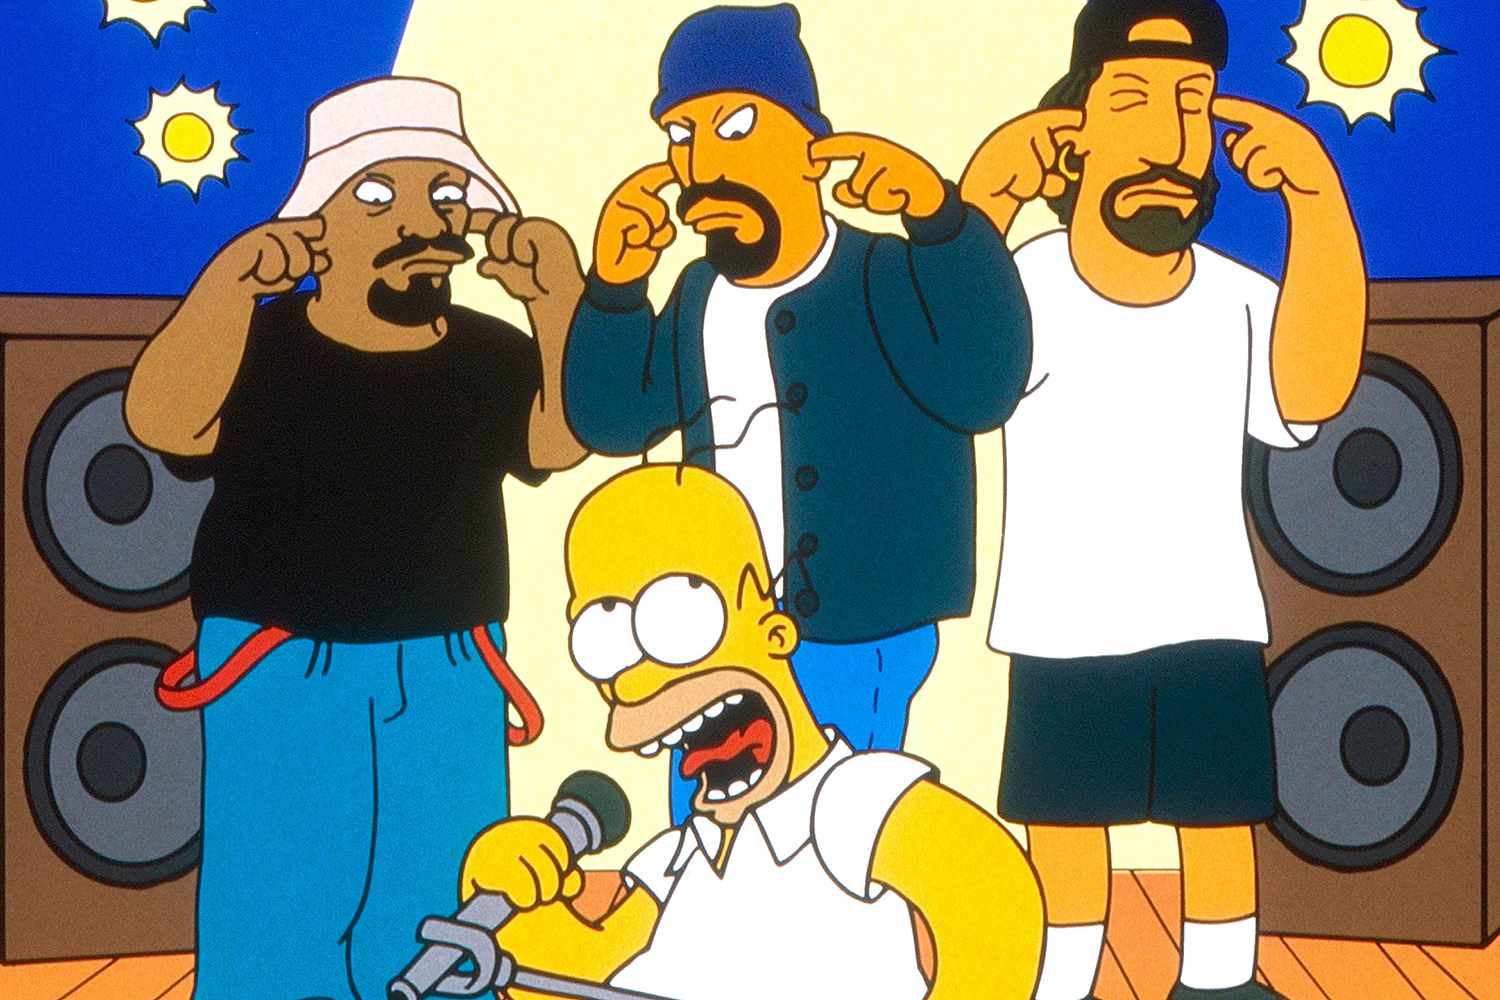 Cypress Hill to Perform with the London Symphony Orchestra as “The Simpsons” Prediction Comes True 28 Years Later